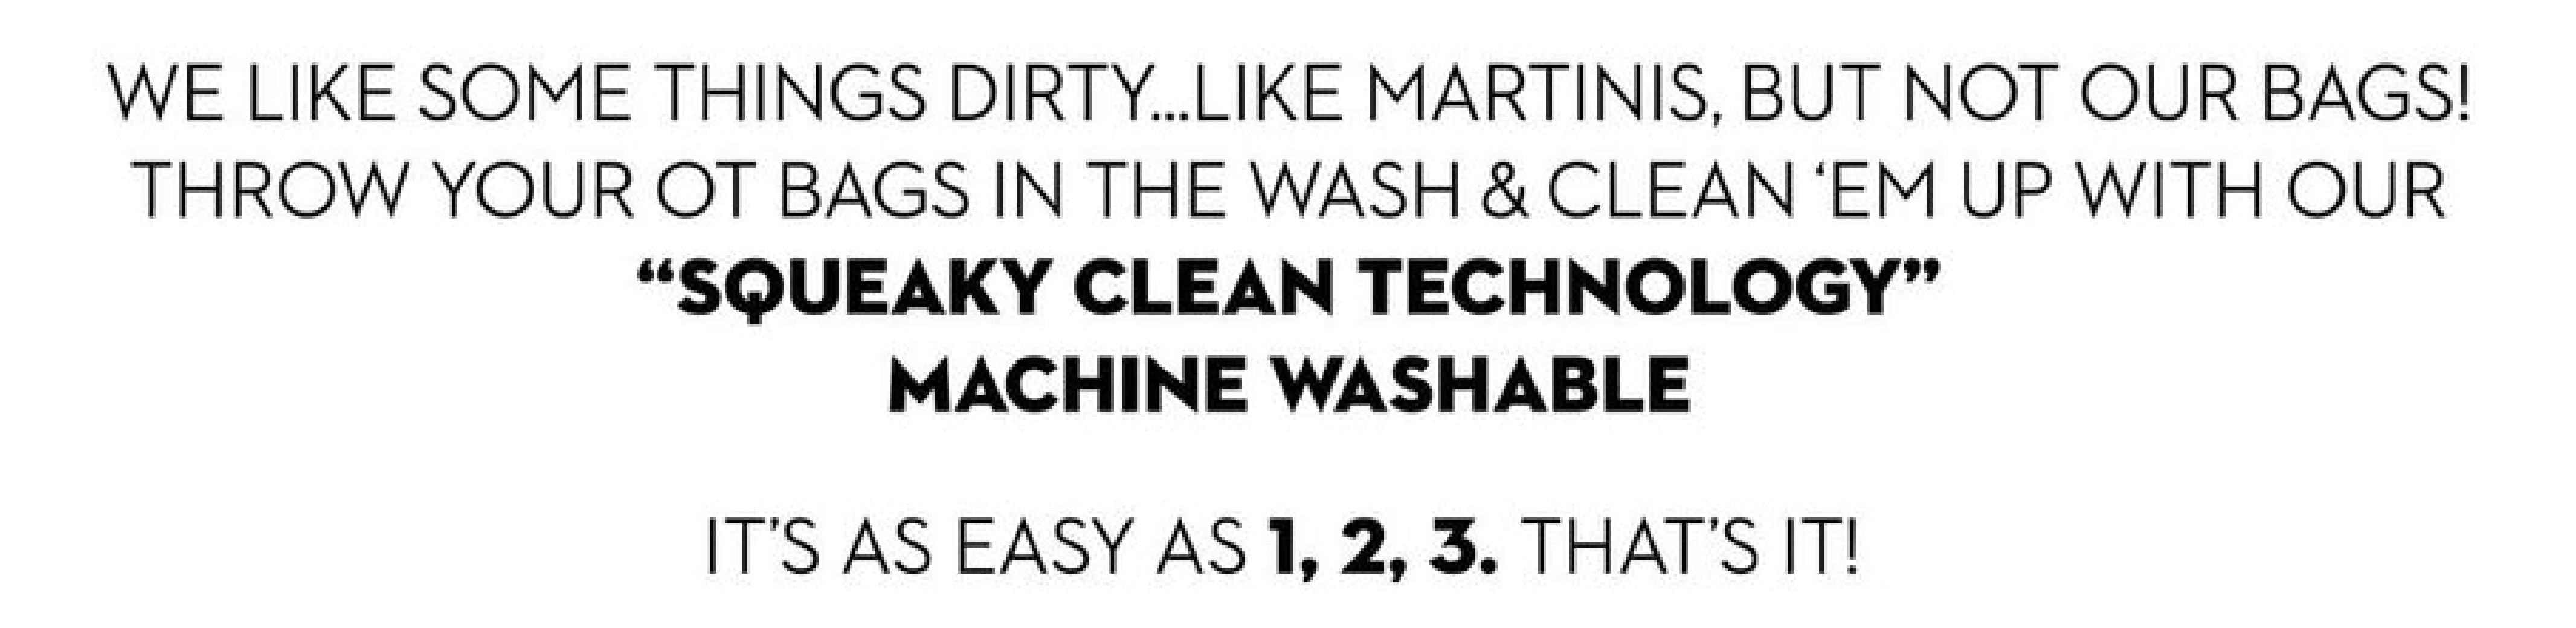 We like some things dirty...like martinis, but not our bags.  Throw your O T bags in the wash and clean em up with our squeaky clean technology, machine washable.  it's as easy as 1 2 3.  That's it!